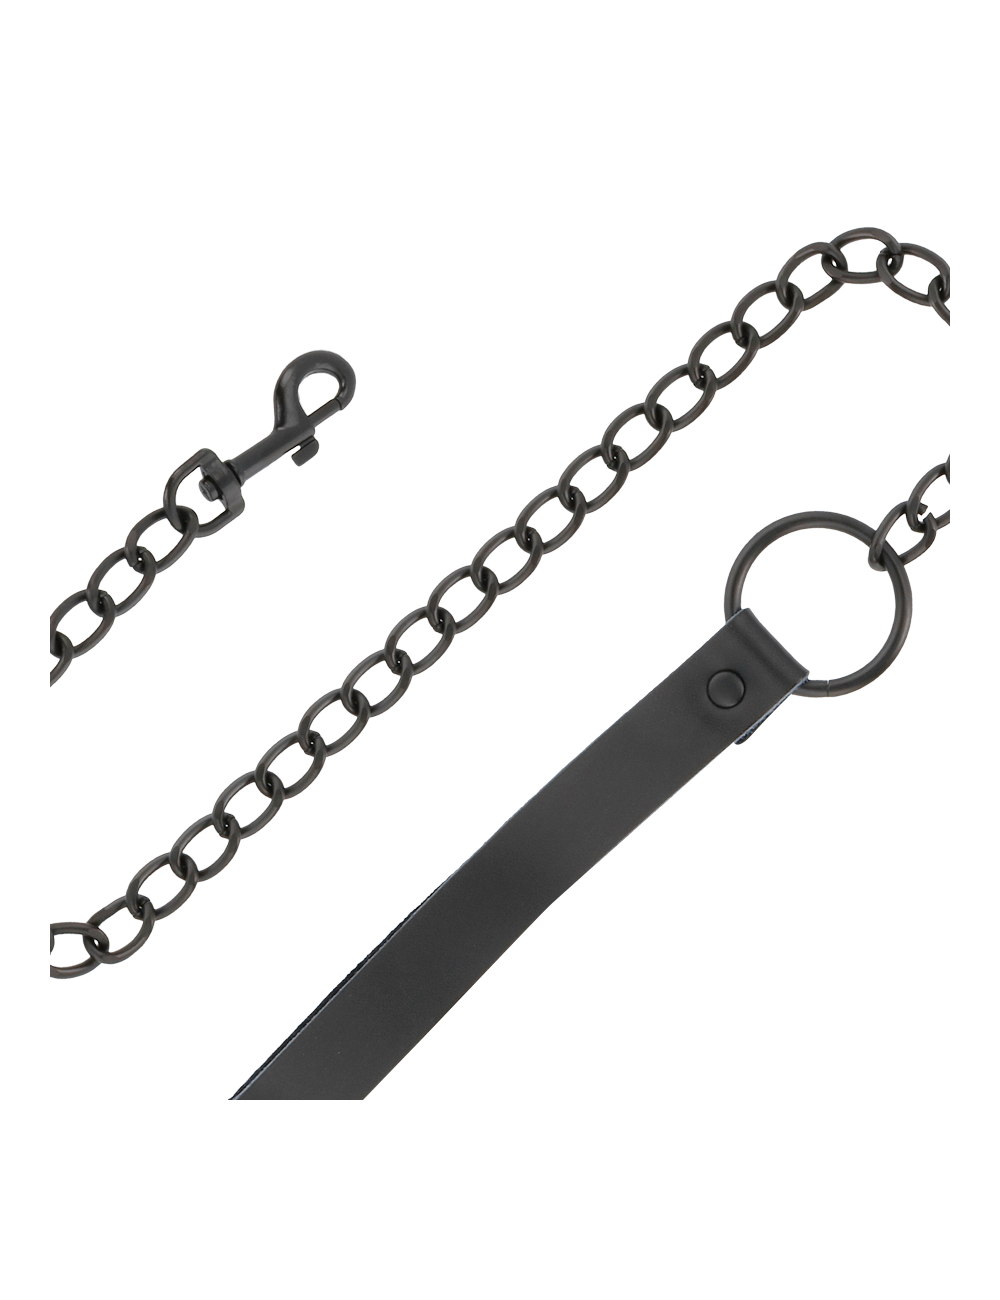 Sextoys - Menottes & accessoires - DARKNESS FULL BLACK COLLAR WITH LEASH - Darkness Bondage